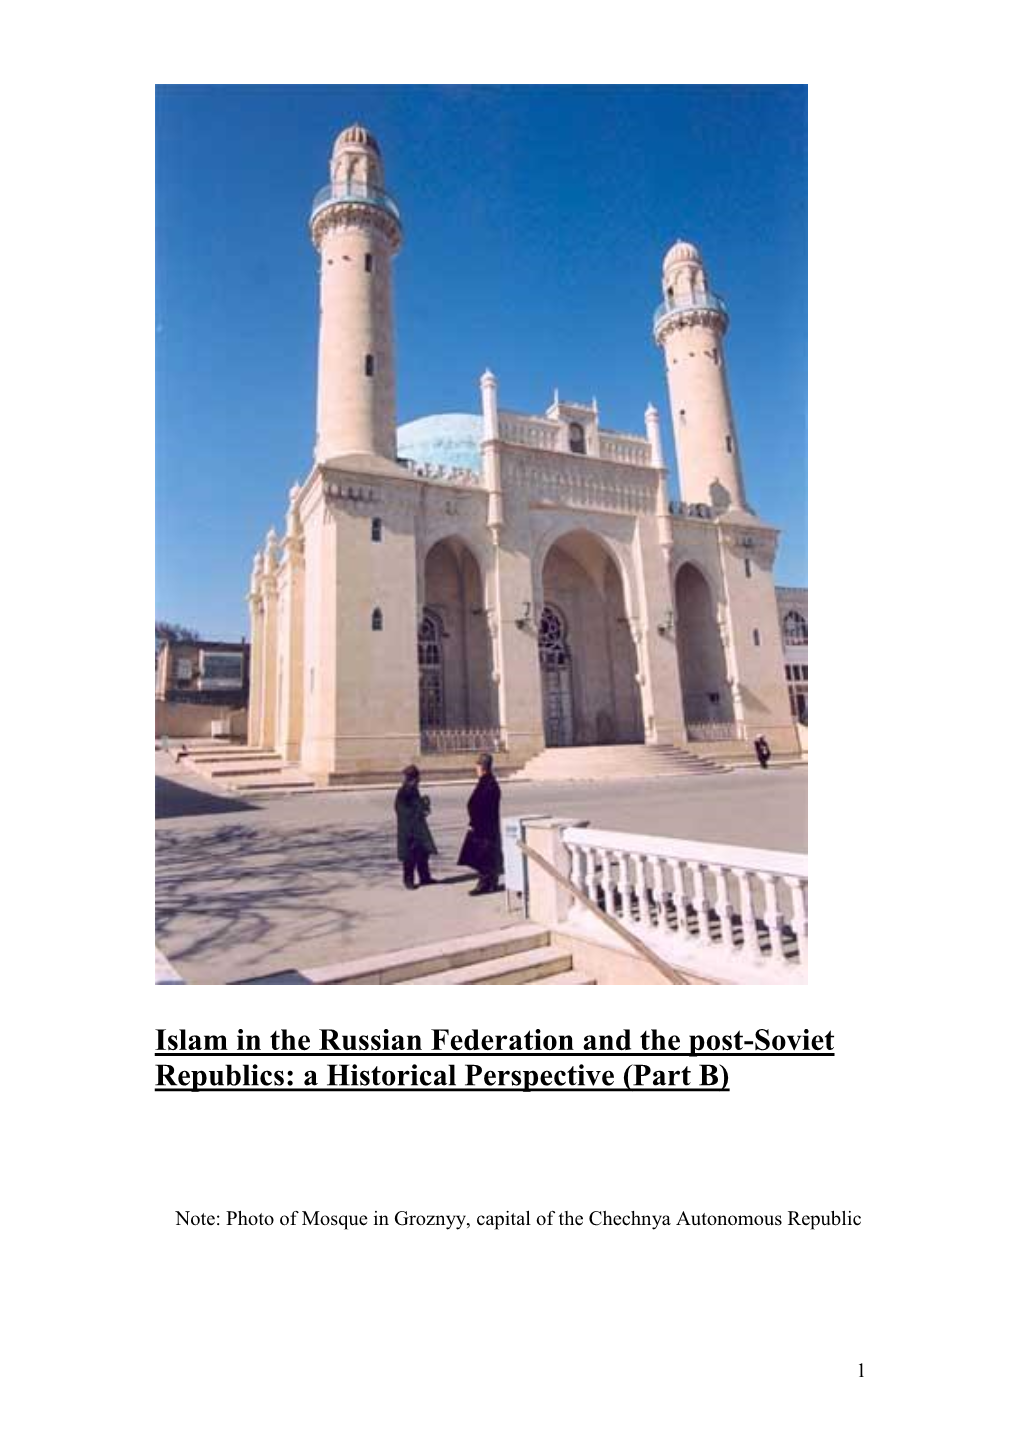 Islam in the Russian Federation and the Post-Soviet Republics: a Historical Perspective (Part B)